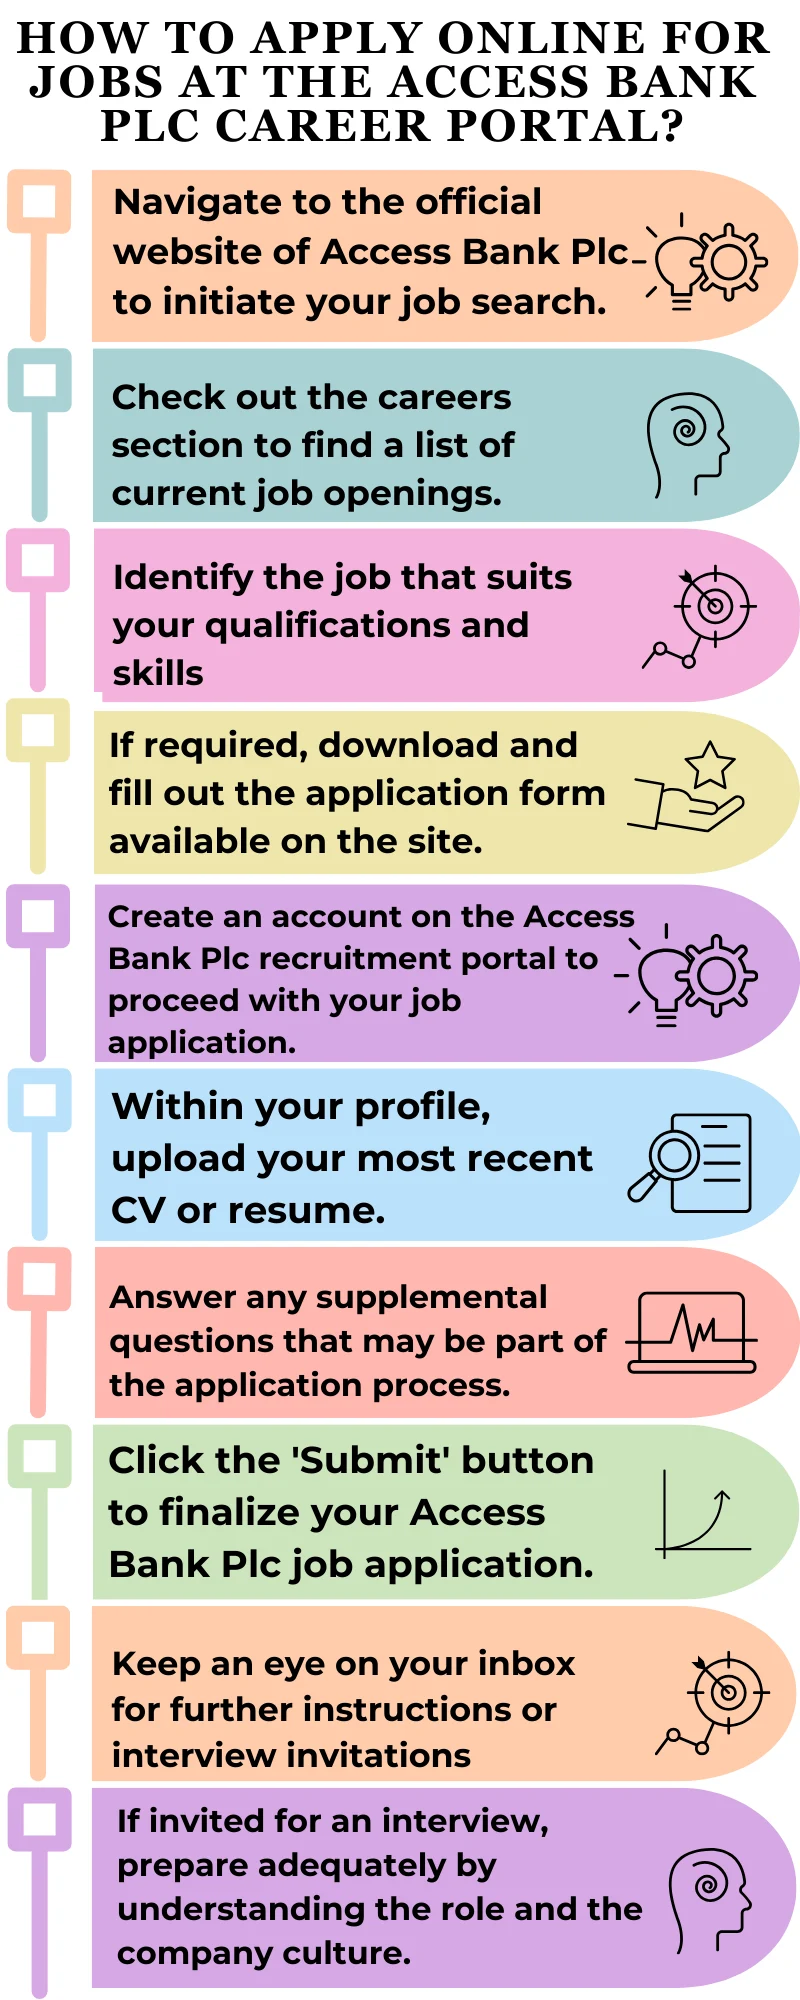 How to Apply Online for Jobs at the Access Bank Plc Career Portal 1 1